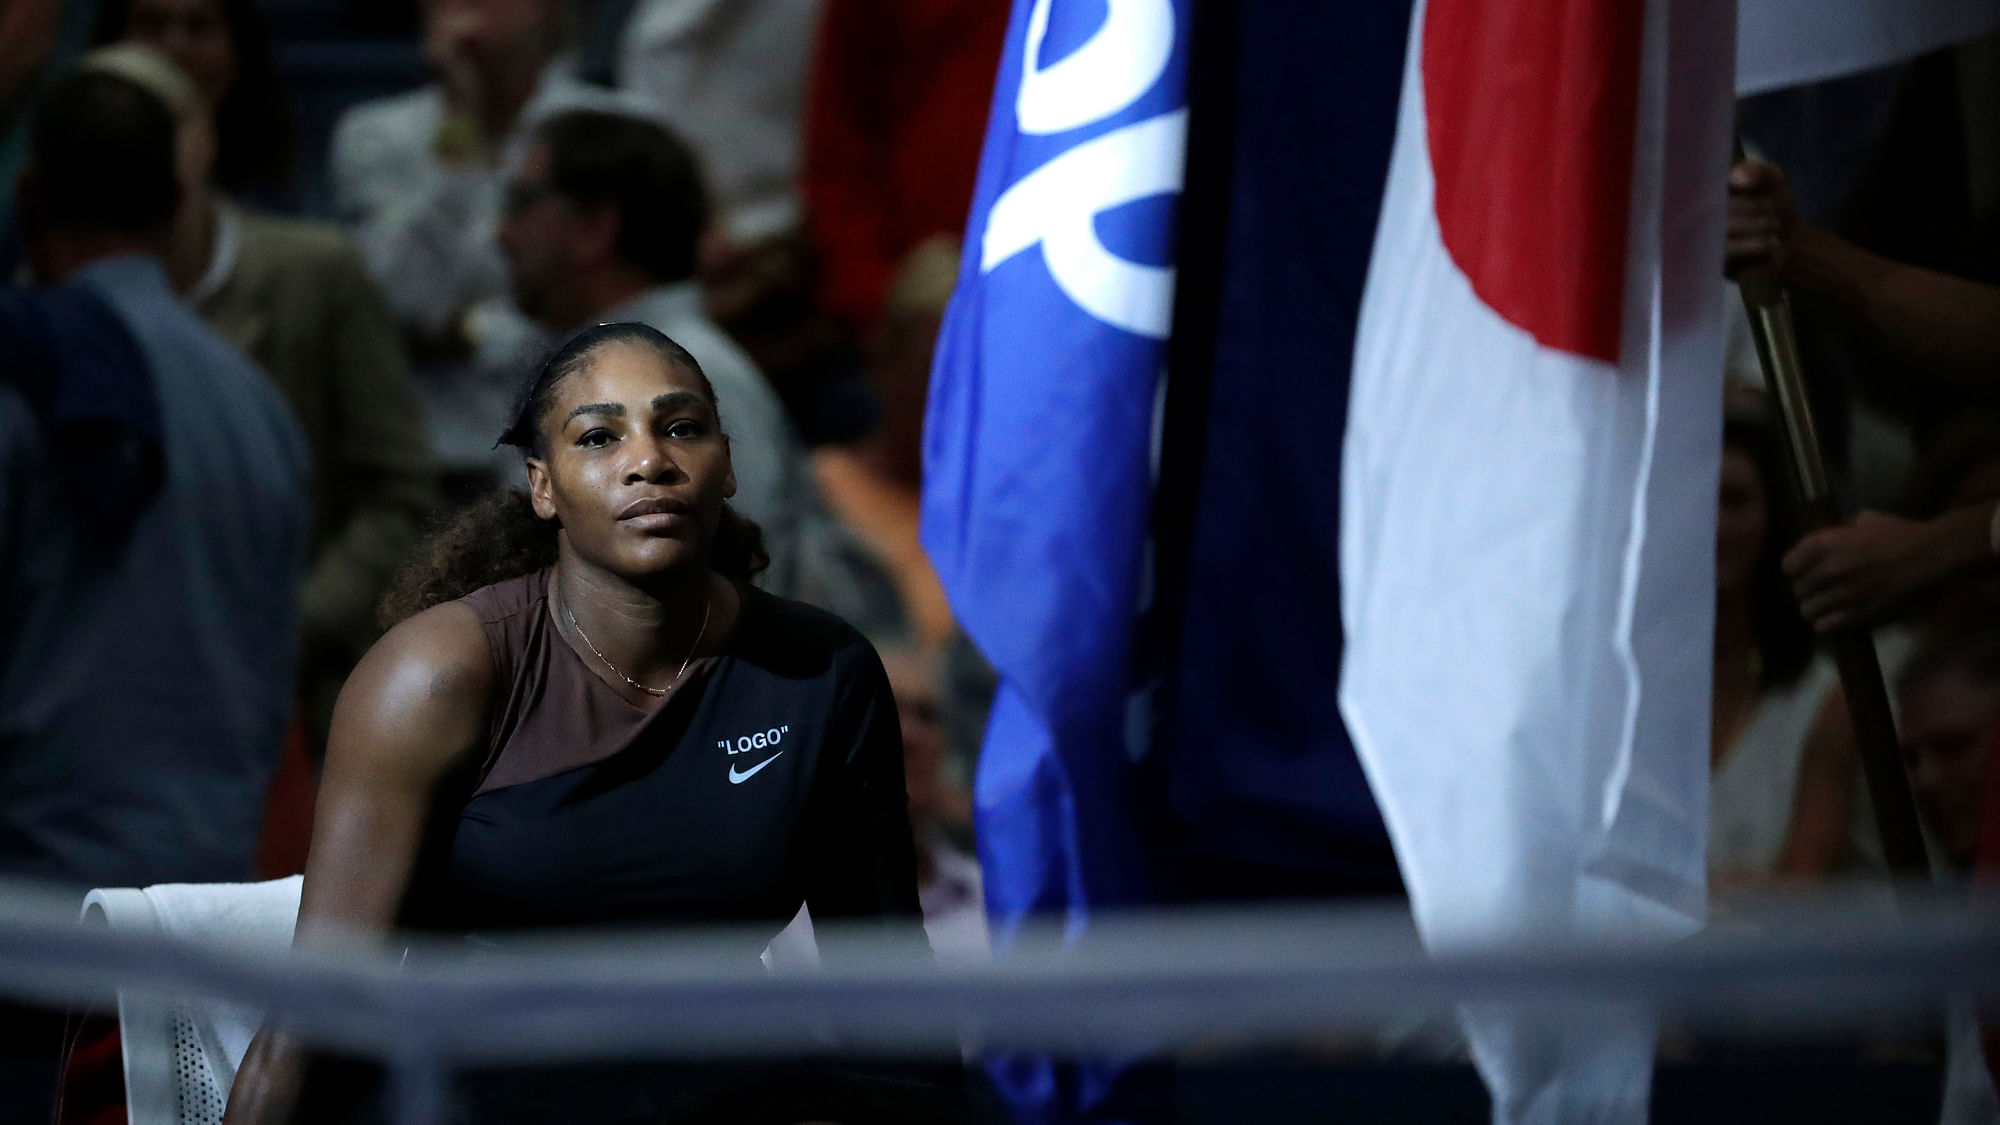 Serena Williams was docked a game in her US Open final against Naomi Osaka for calling the chair umpire a thief.